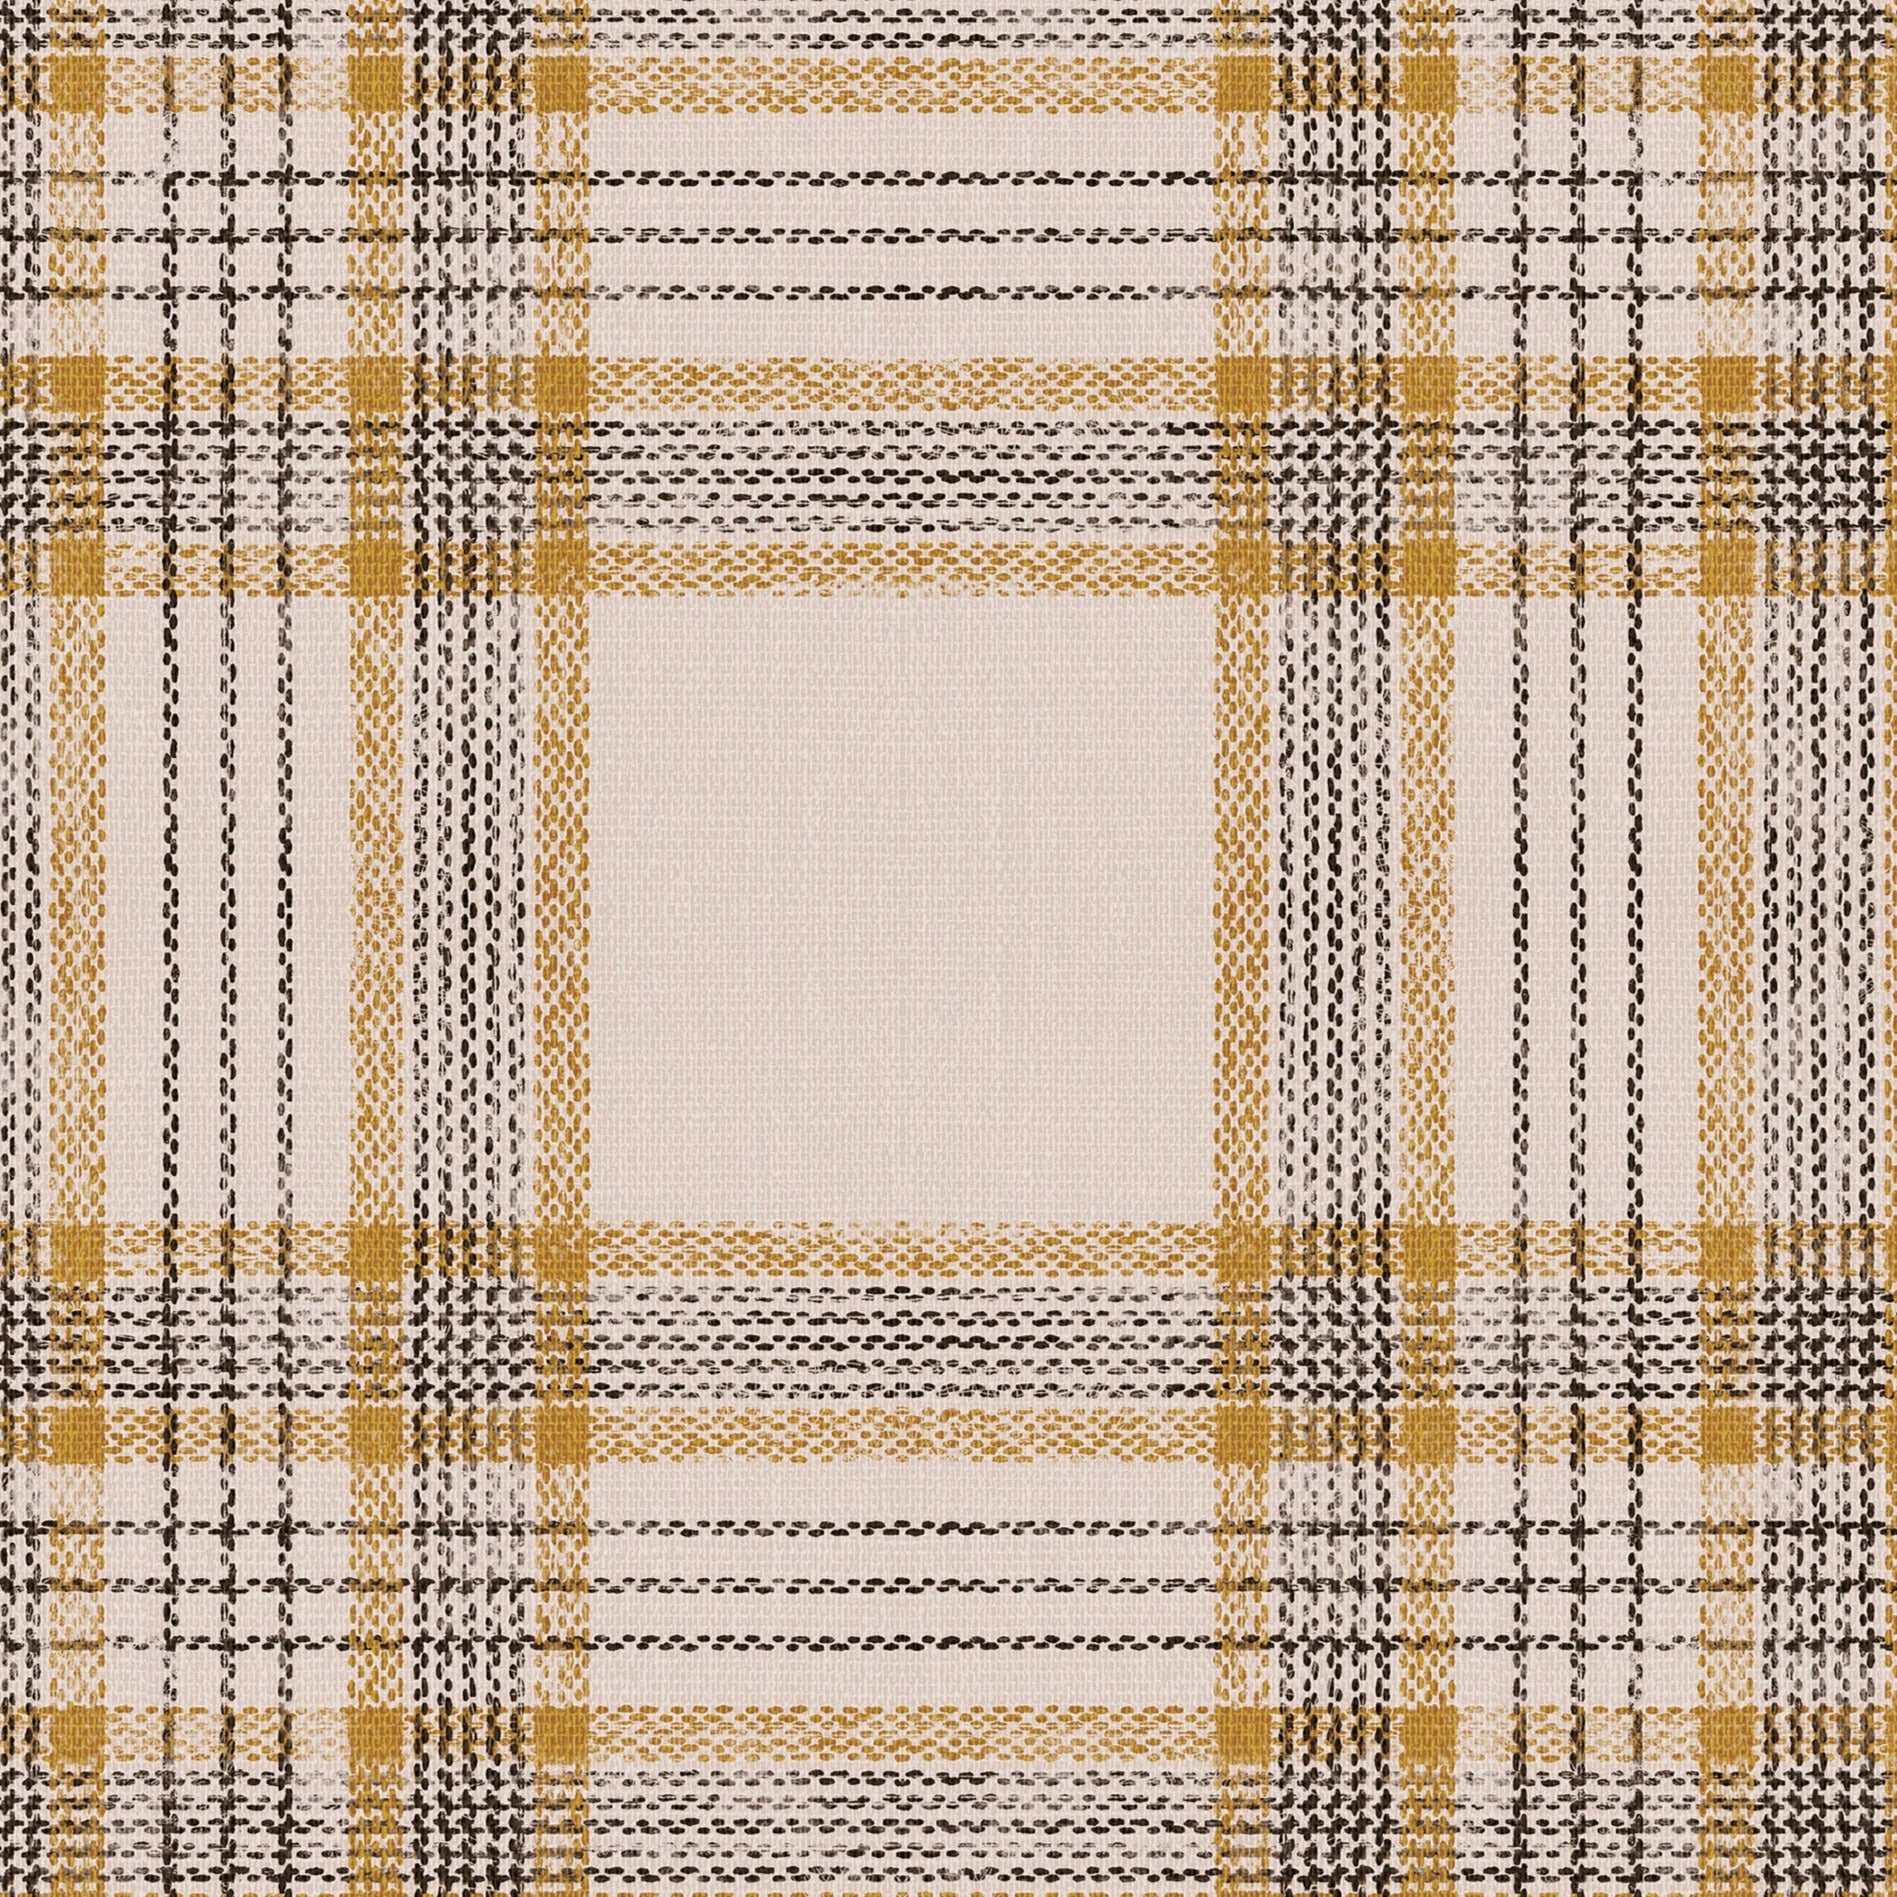 A seamless pattern of tartan wallpaper featuring a classic checkered design in black and gold hues. The grid pattern showcases intersecting lines of black, gold, and white, creating a bold and sophisticated look. The texture adds depth and richness to the design.